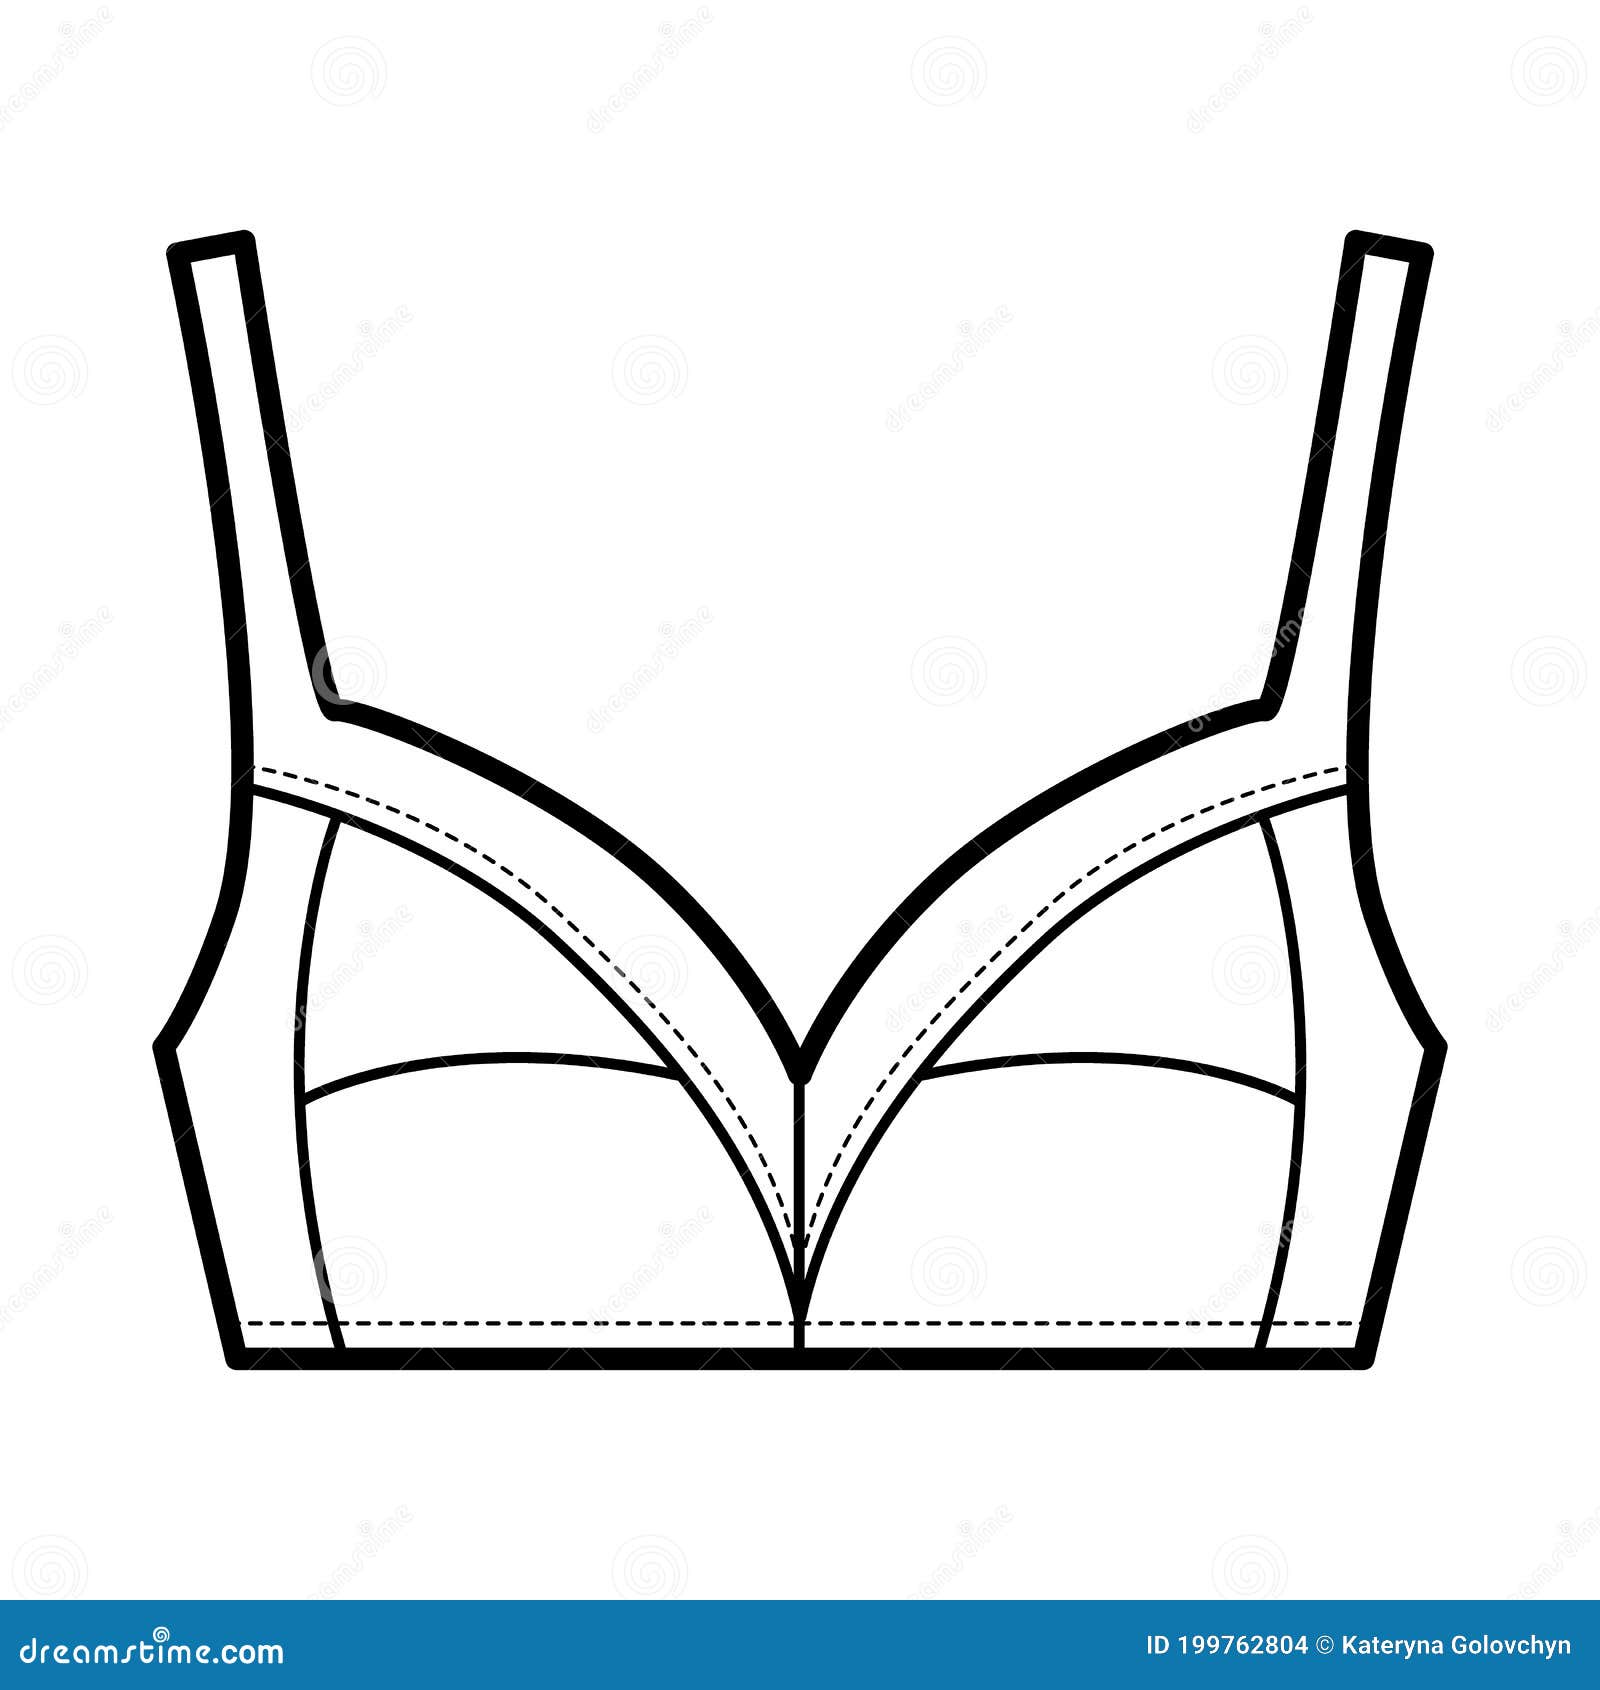 Types of bras. Big vector collection of lingerie. Set of underwear